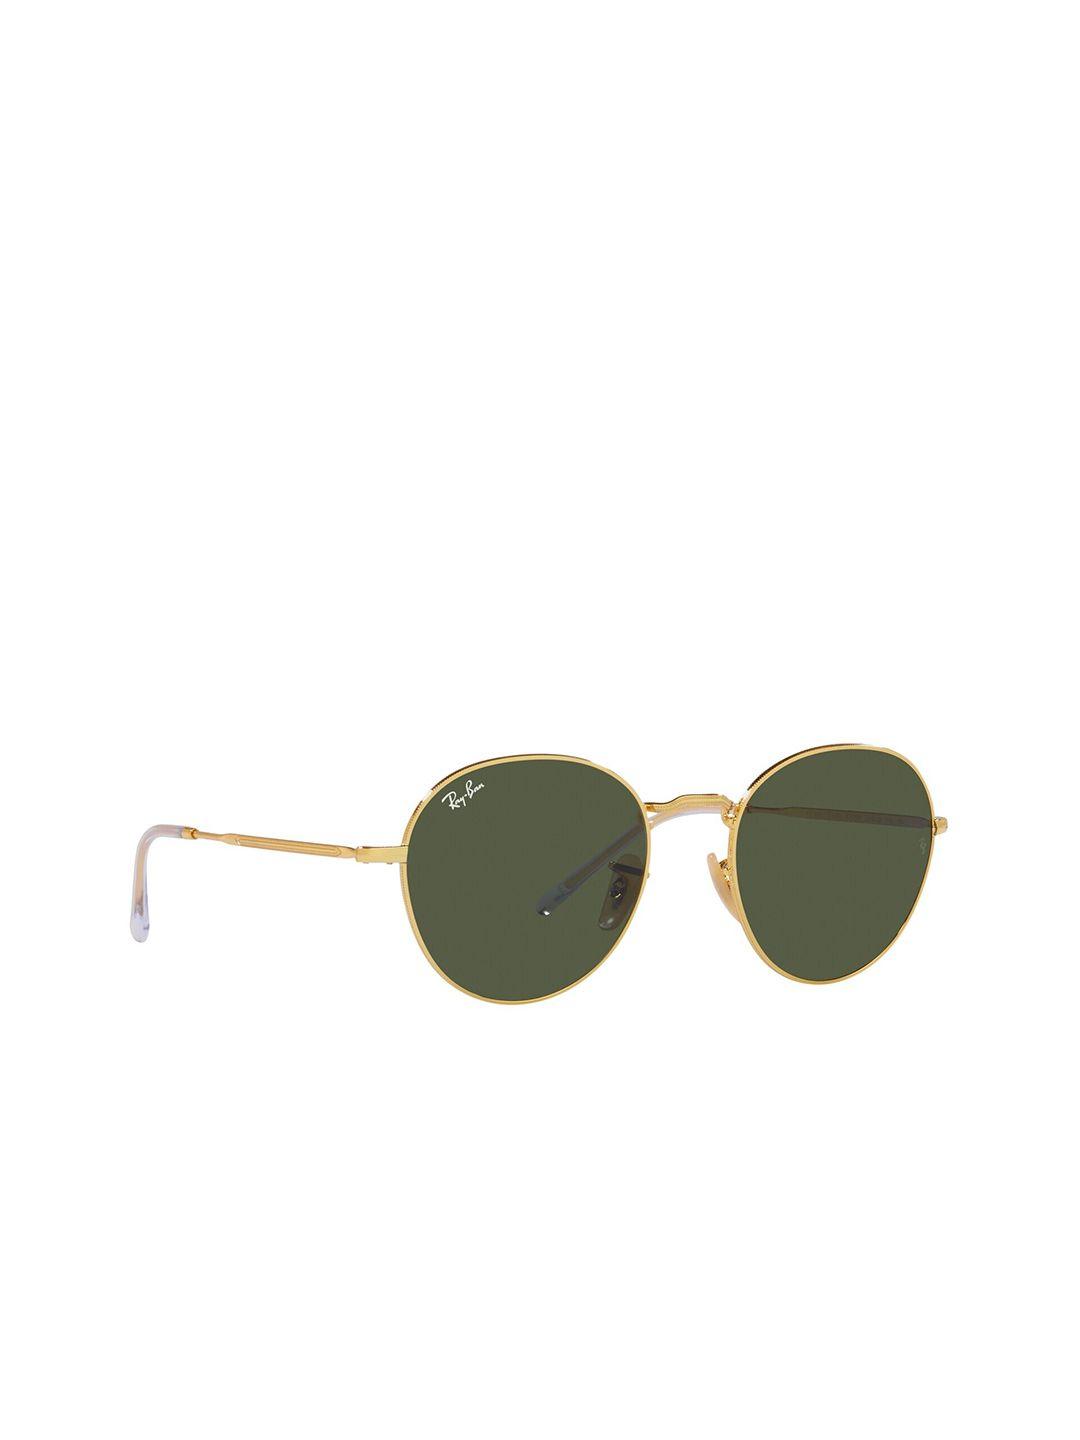 ray-ban unisex round sunglasses with uv protected lens